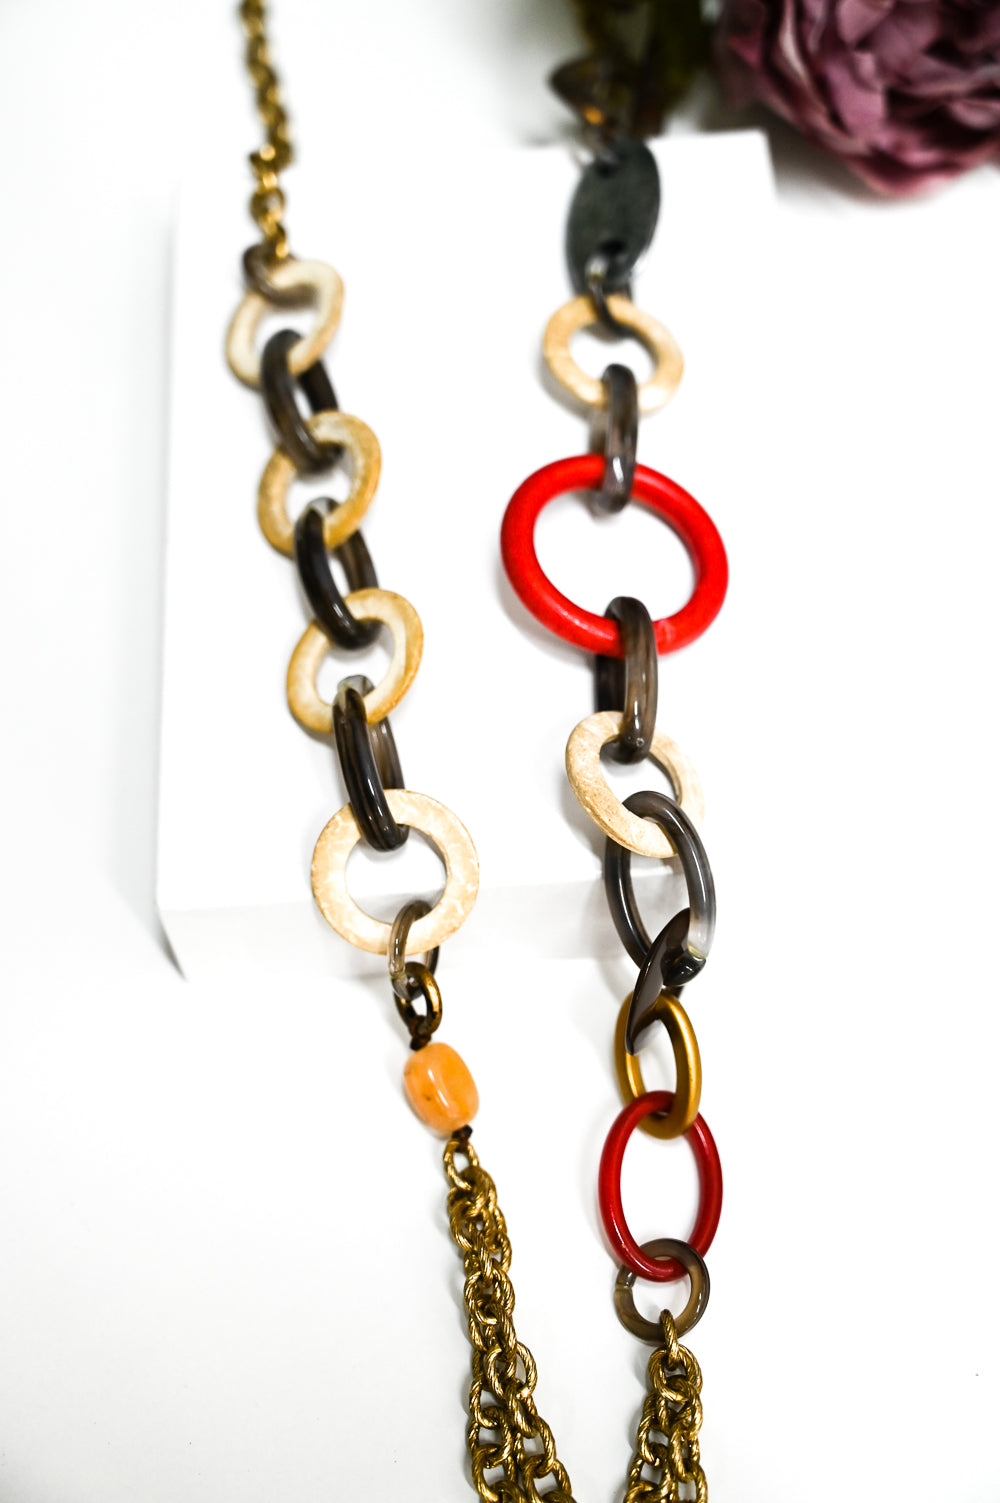 Chain Ring Necklace